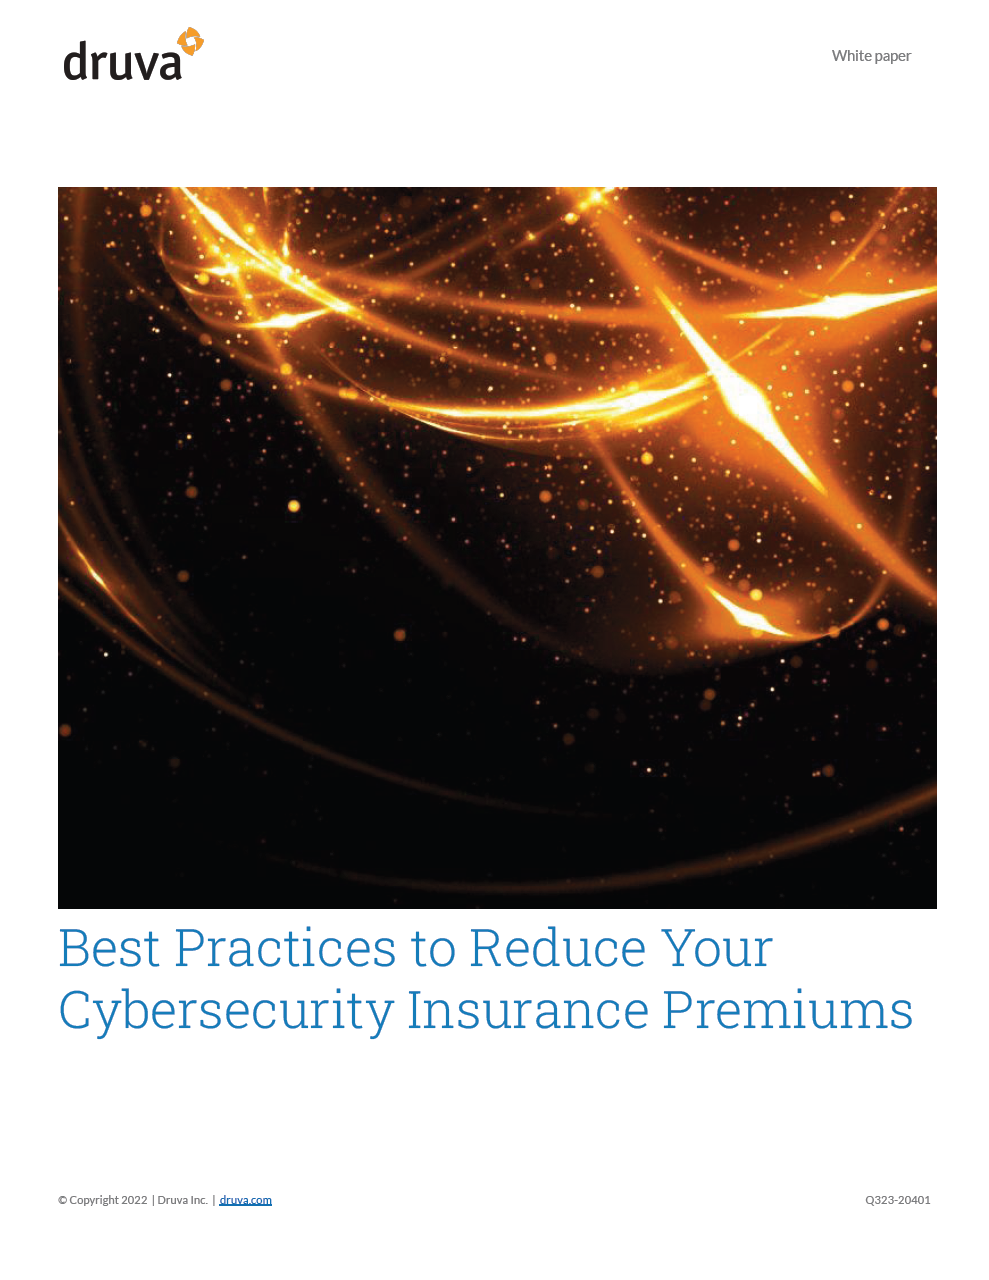 Best Practices To Reduce Cybersecurity Insurance Premiums